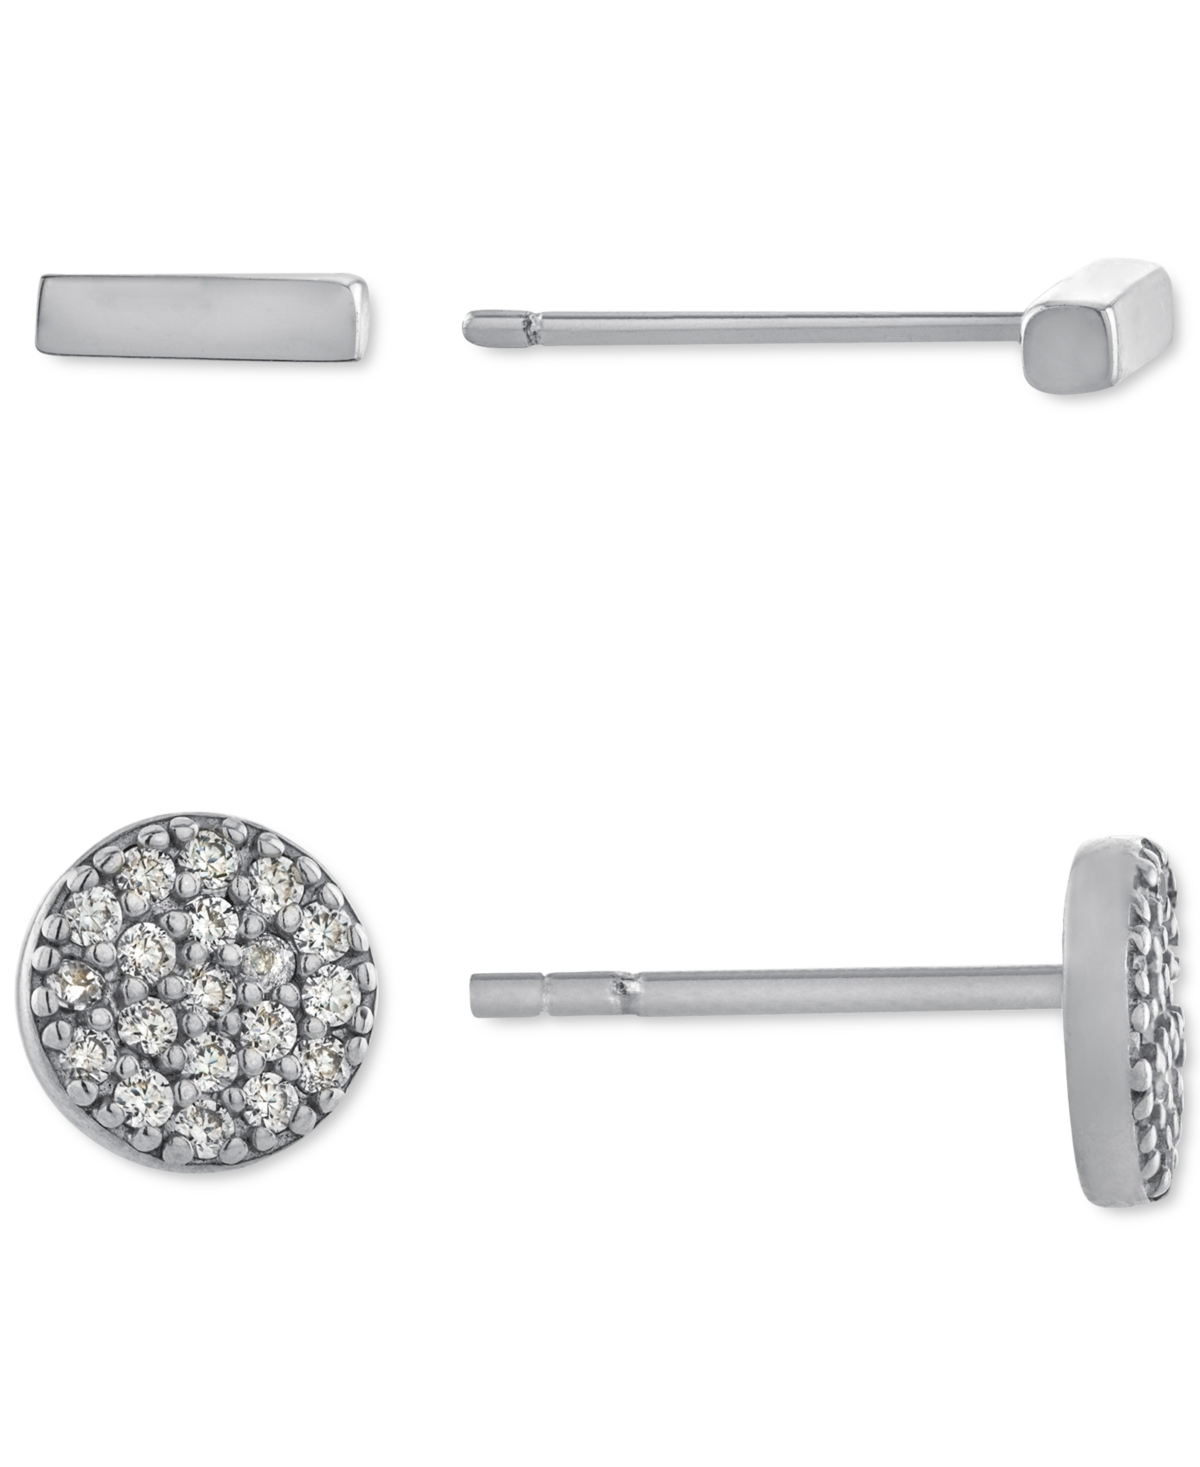 2-Pc. Cubic Zirconia Cluster & Bar Stud Earrings in Sterling Silver, Created for Macy's - Sterling Silver